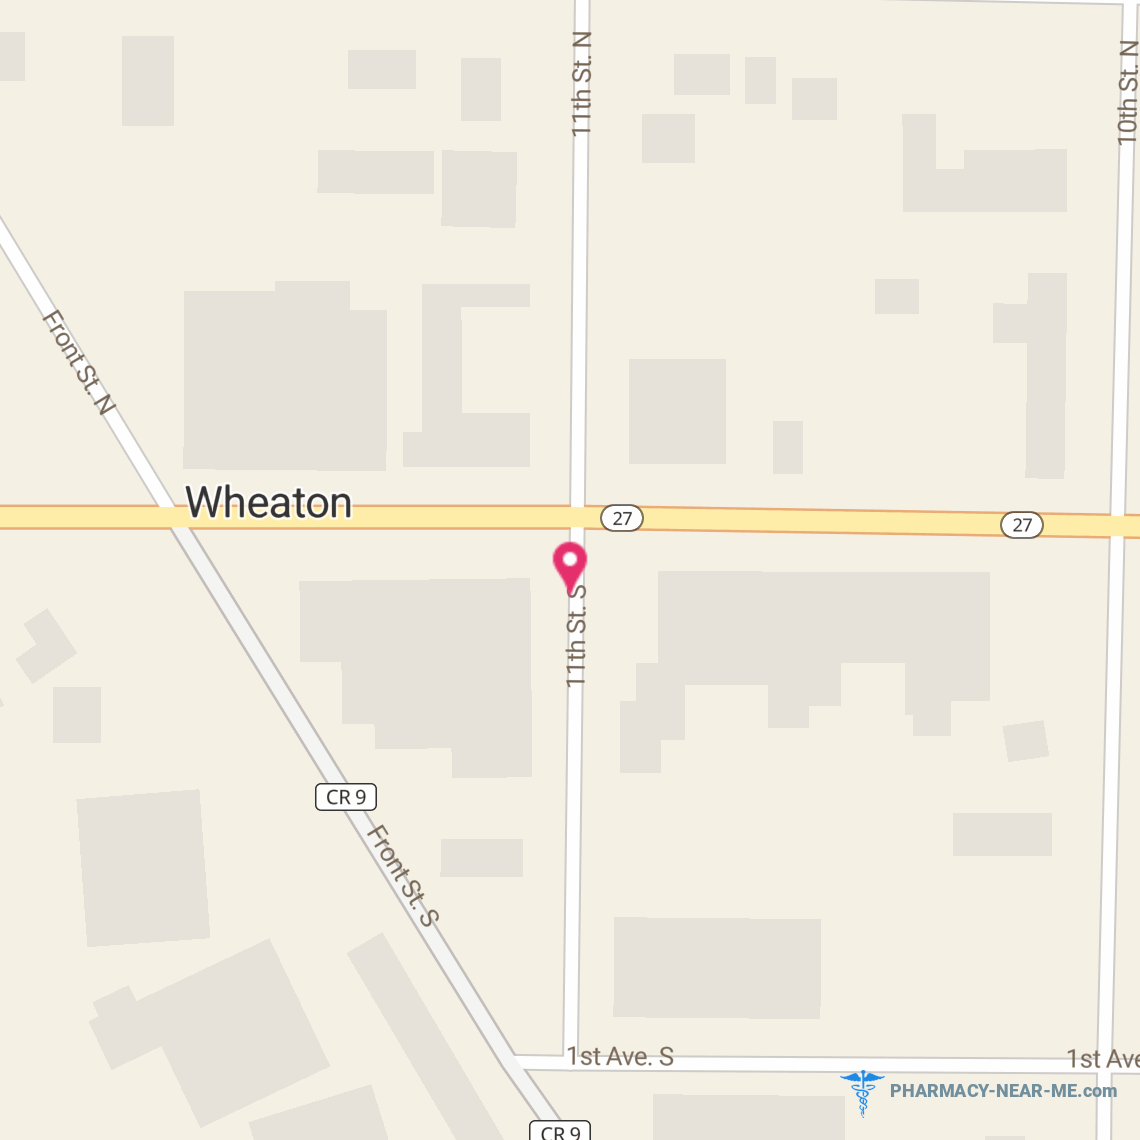 WHEATON DRUG AND GIFTS - Pharmacy Hours, Phone, Reviews & Information: 1105 Broadway, Wheaton, Minnesota 56296, United States